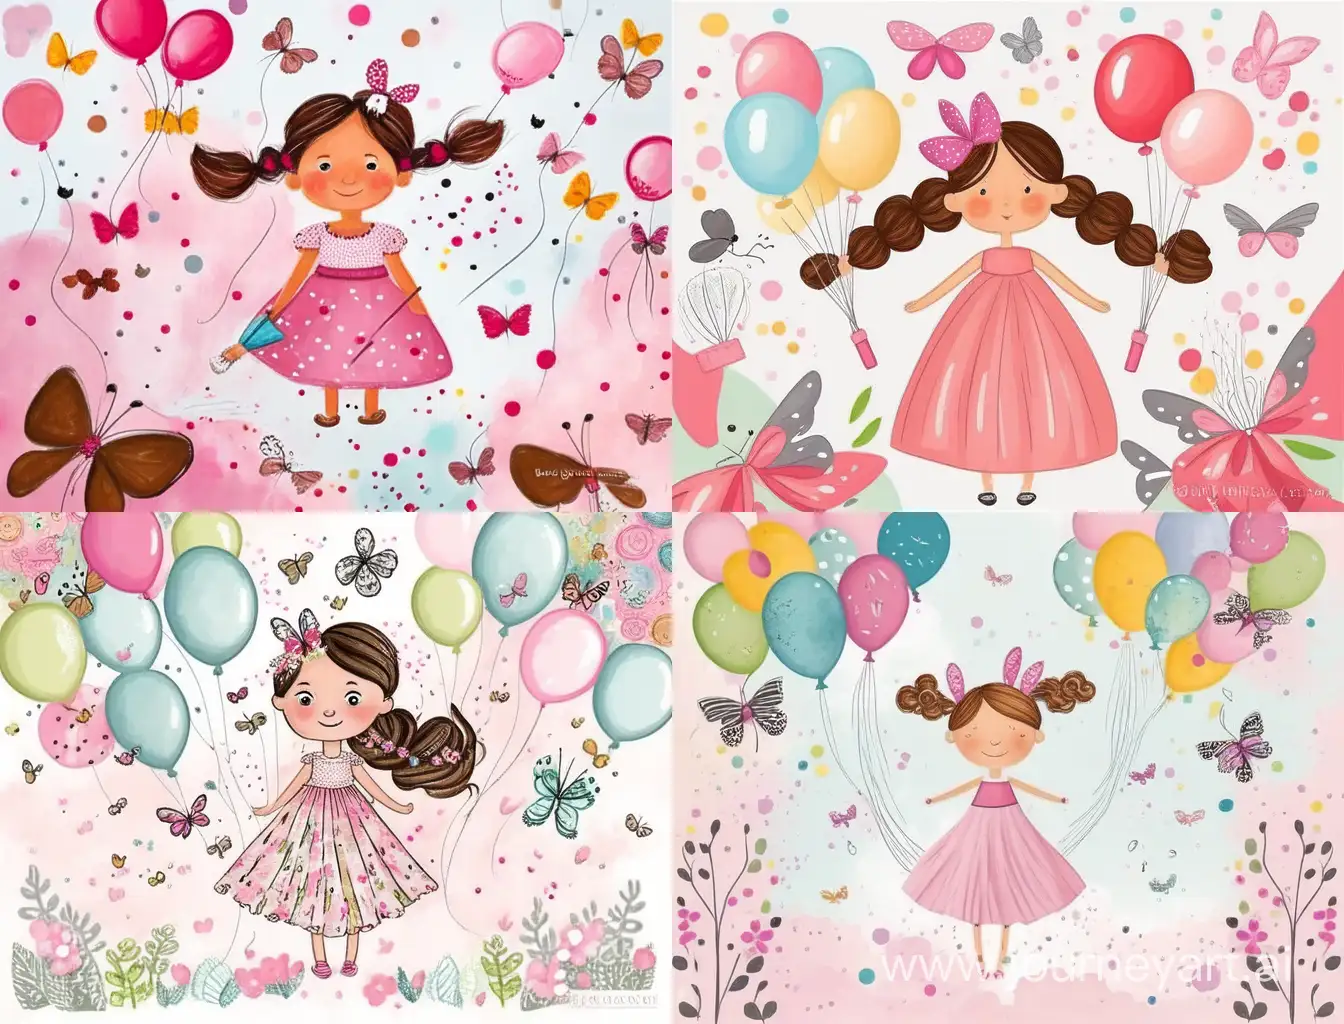 A whimsical nursery poster of cute rosy cheeks girl wearing a pink dress with dark spots and a bow in her hair, surrounded by oversized pencils, balloons that are almost as tall as she is, and Butterflies in different sizes and colors flutter around the scene adding to the magical atmosphere,  background is painted with splashes of color that blend seamlessly, in the style of CONFETISTAR.